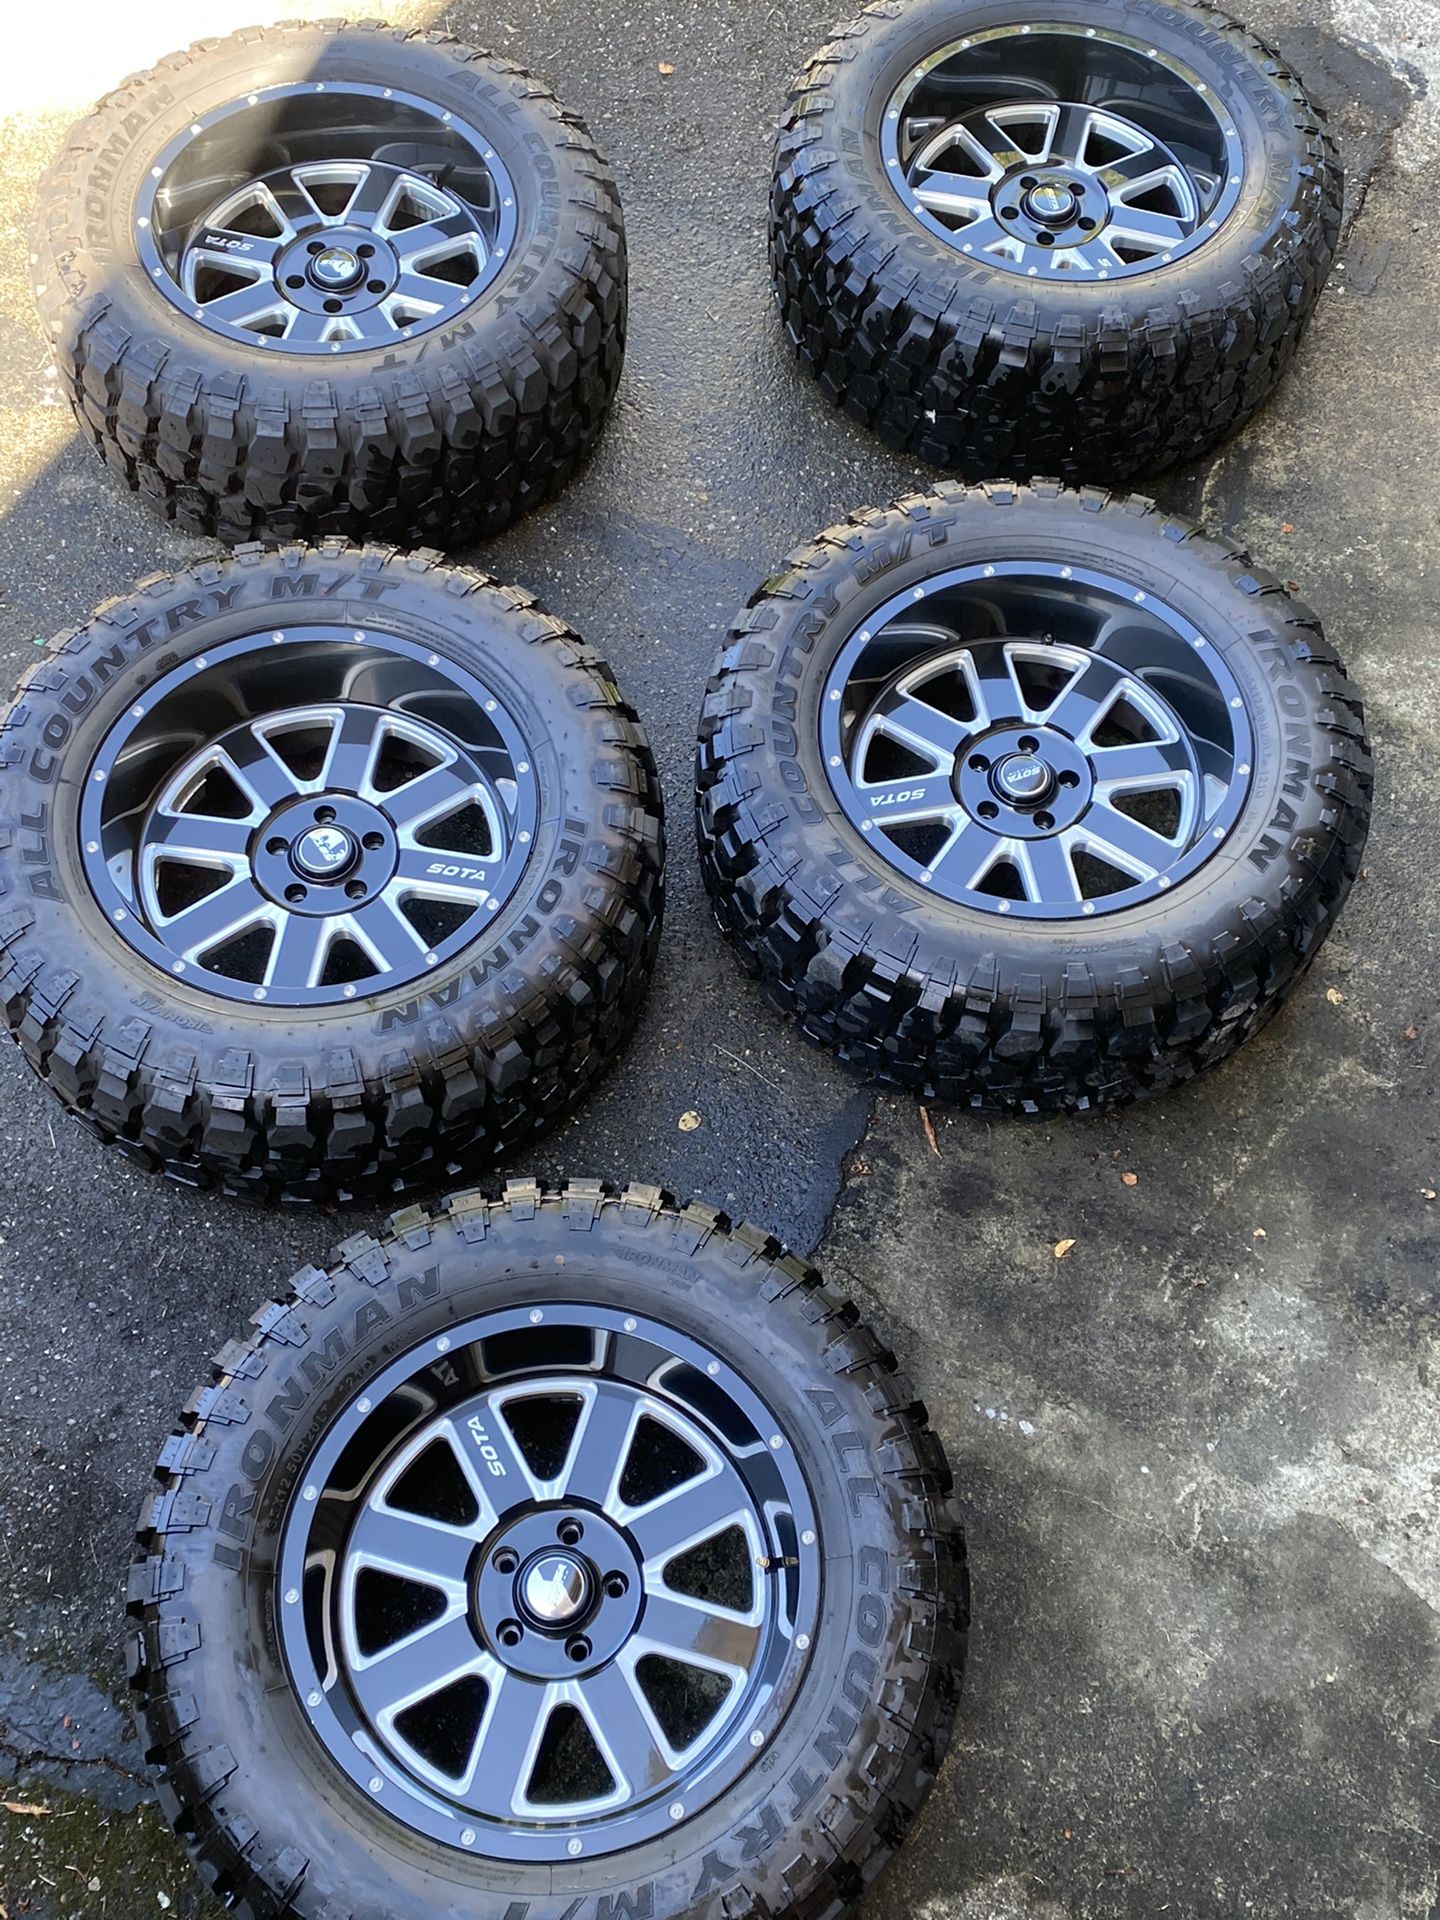 Set of 5 20” Wheels with brand new 35” M/T Tires for Jeep Wrangler